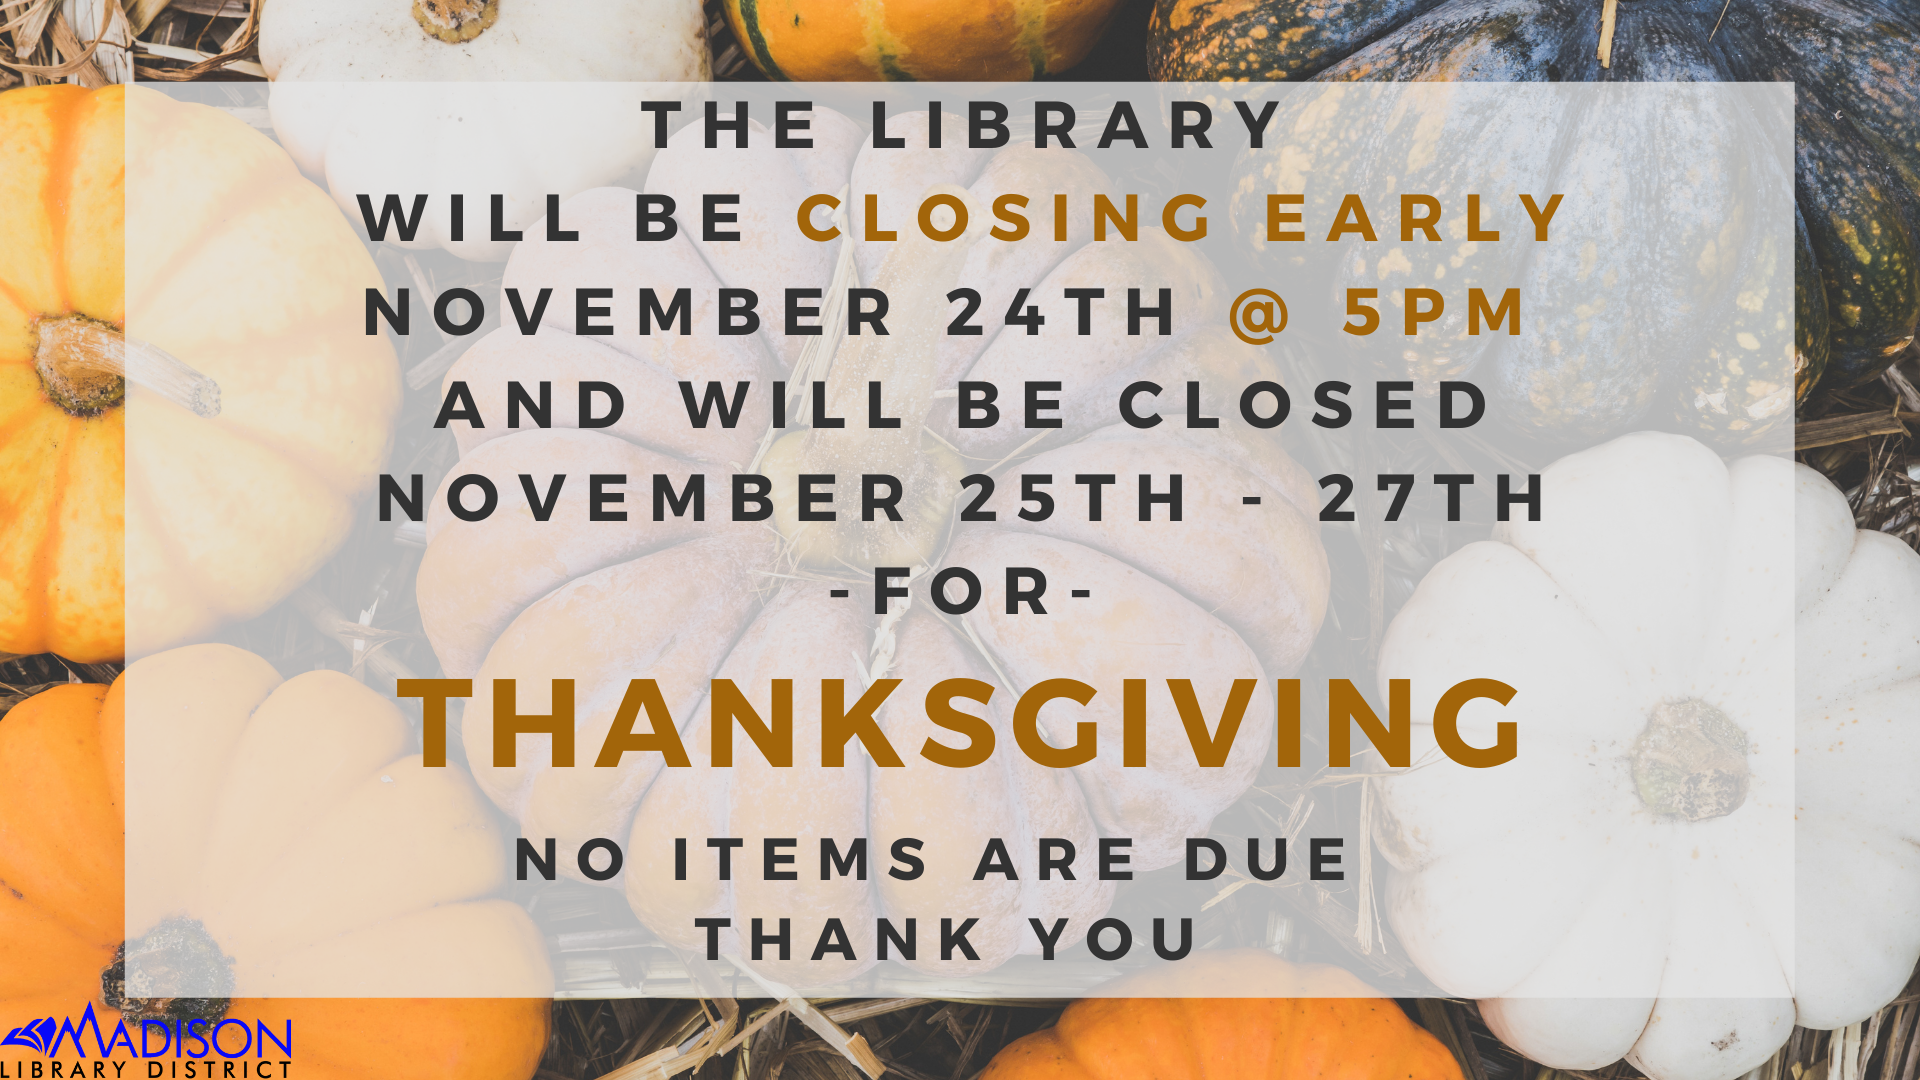 The library will be closed on Wednesday, November 11 for Veteran's Day. No items are due. Thank you.